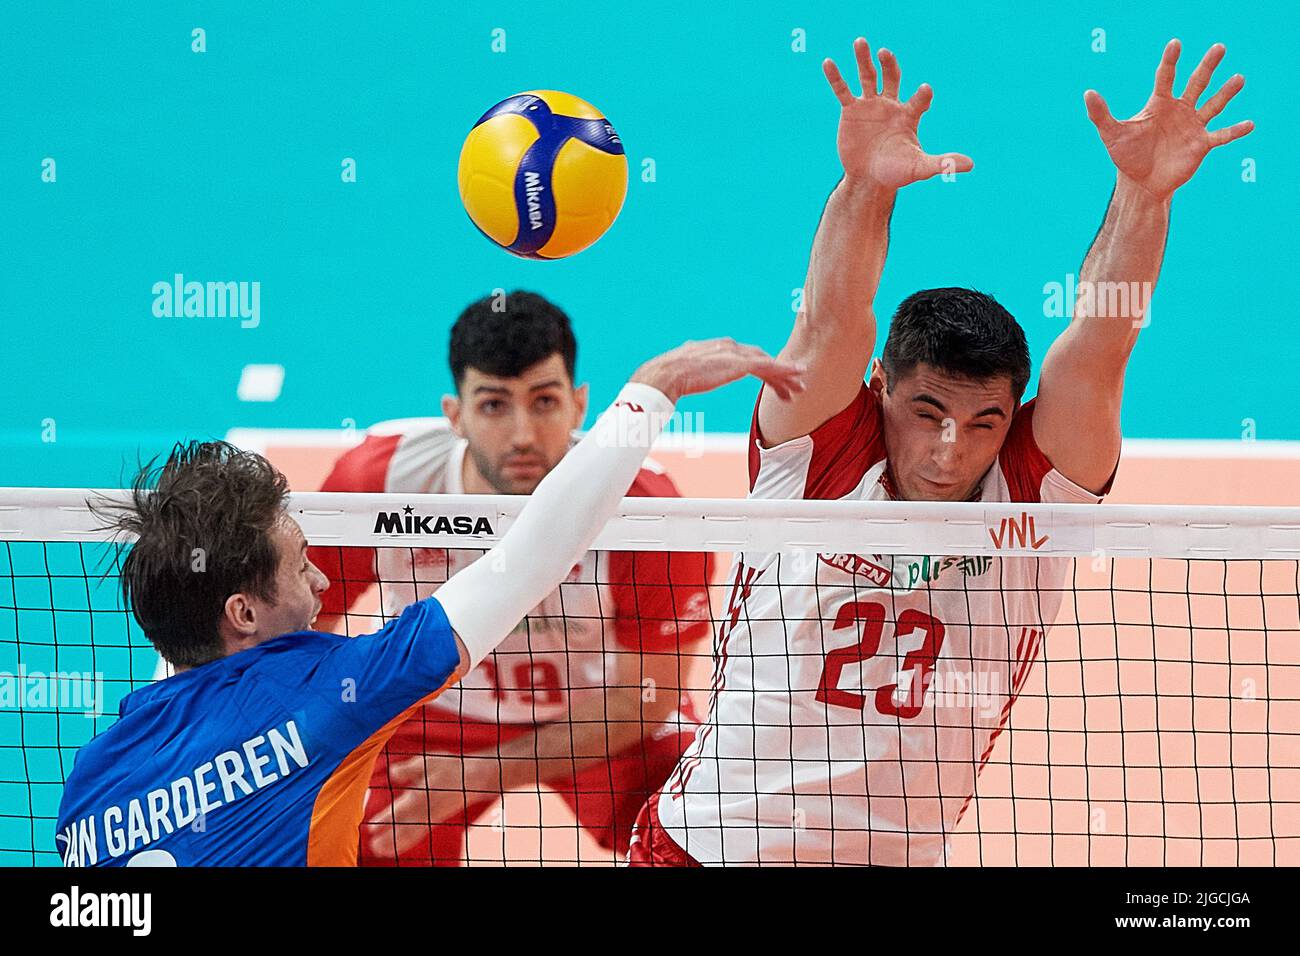 Gdansk, Poland. 09th July, 2022. Karol Butryn (R) of Poland and Maarten Van Garderen (L) of the Netherlands during the 2022 men's FIVB Volleyball Nations League match between Poland and the Netherlands in Gdansk, Poland, 09 July 2022. Credit: PAP/Alamy Live News Stock Photo